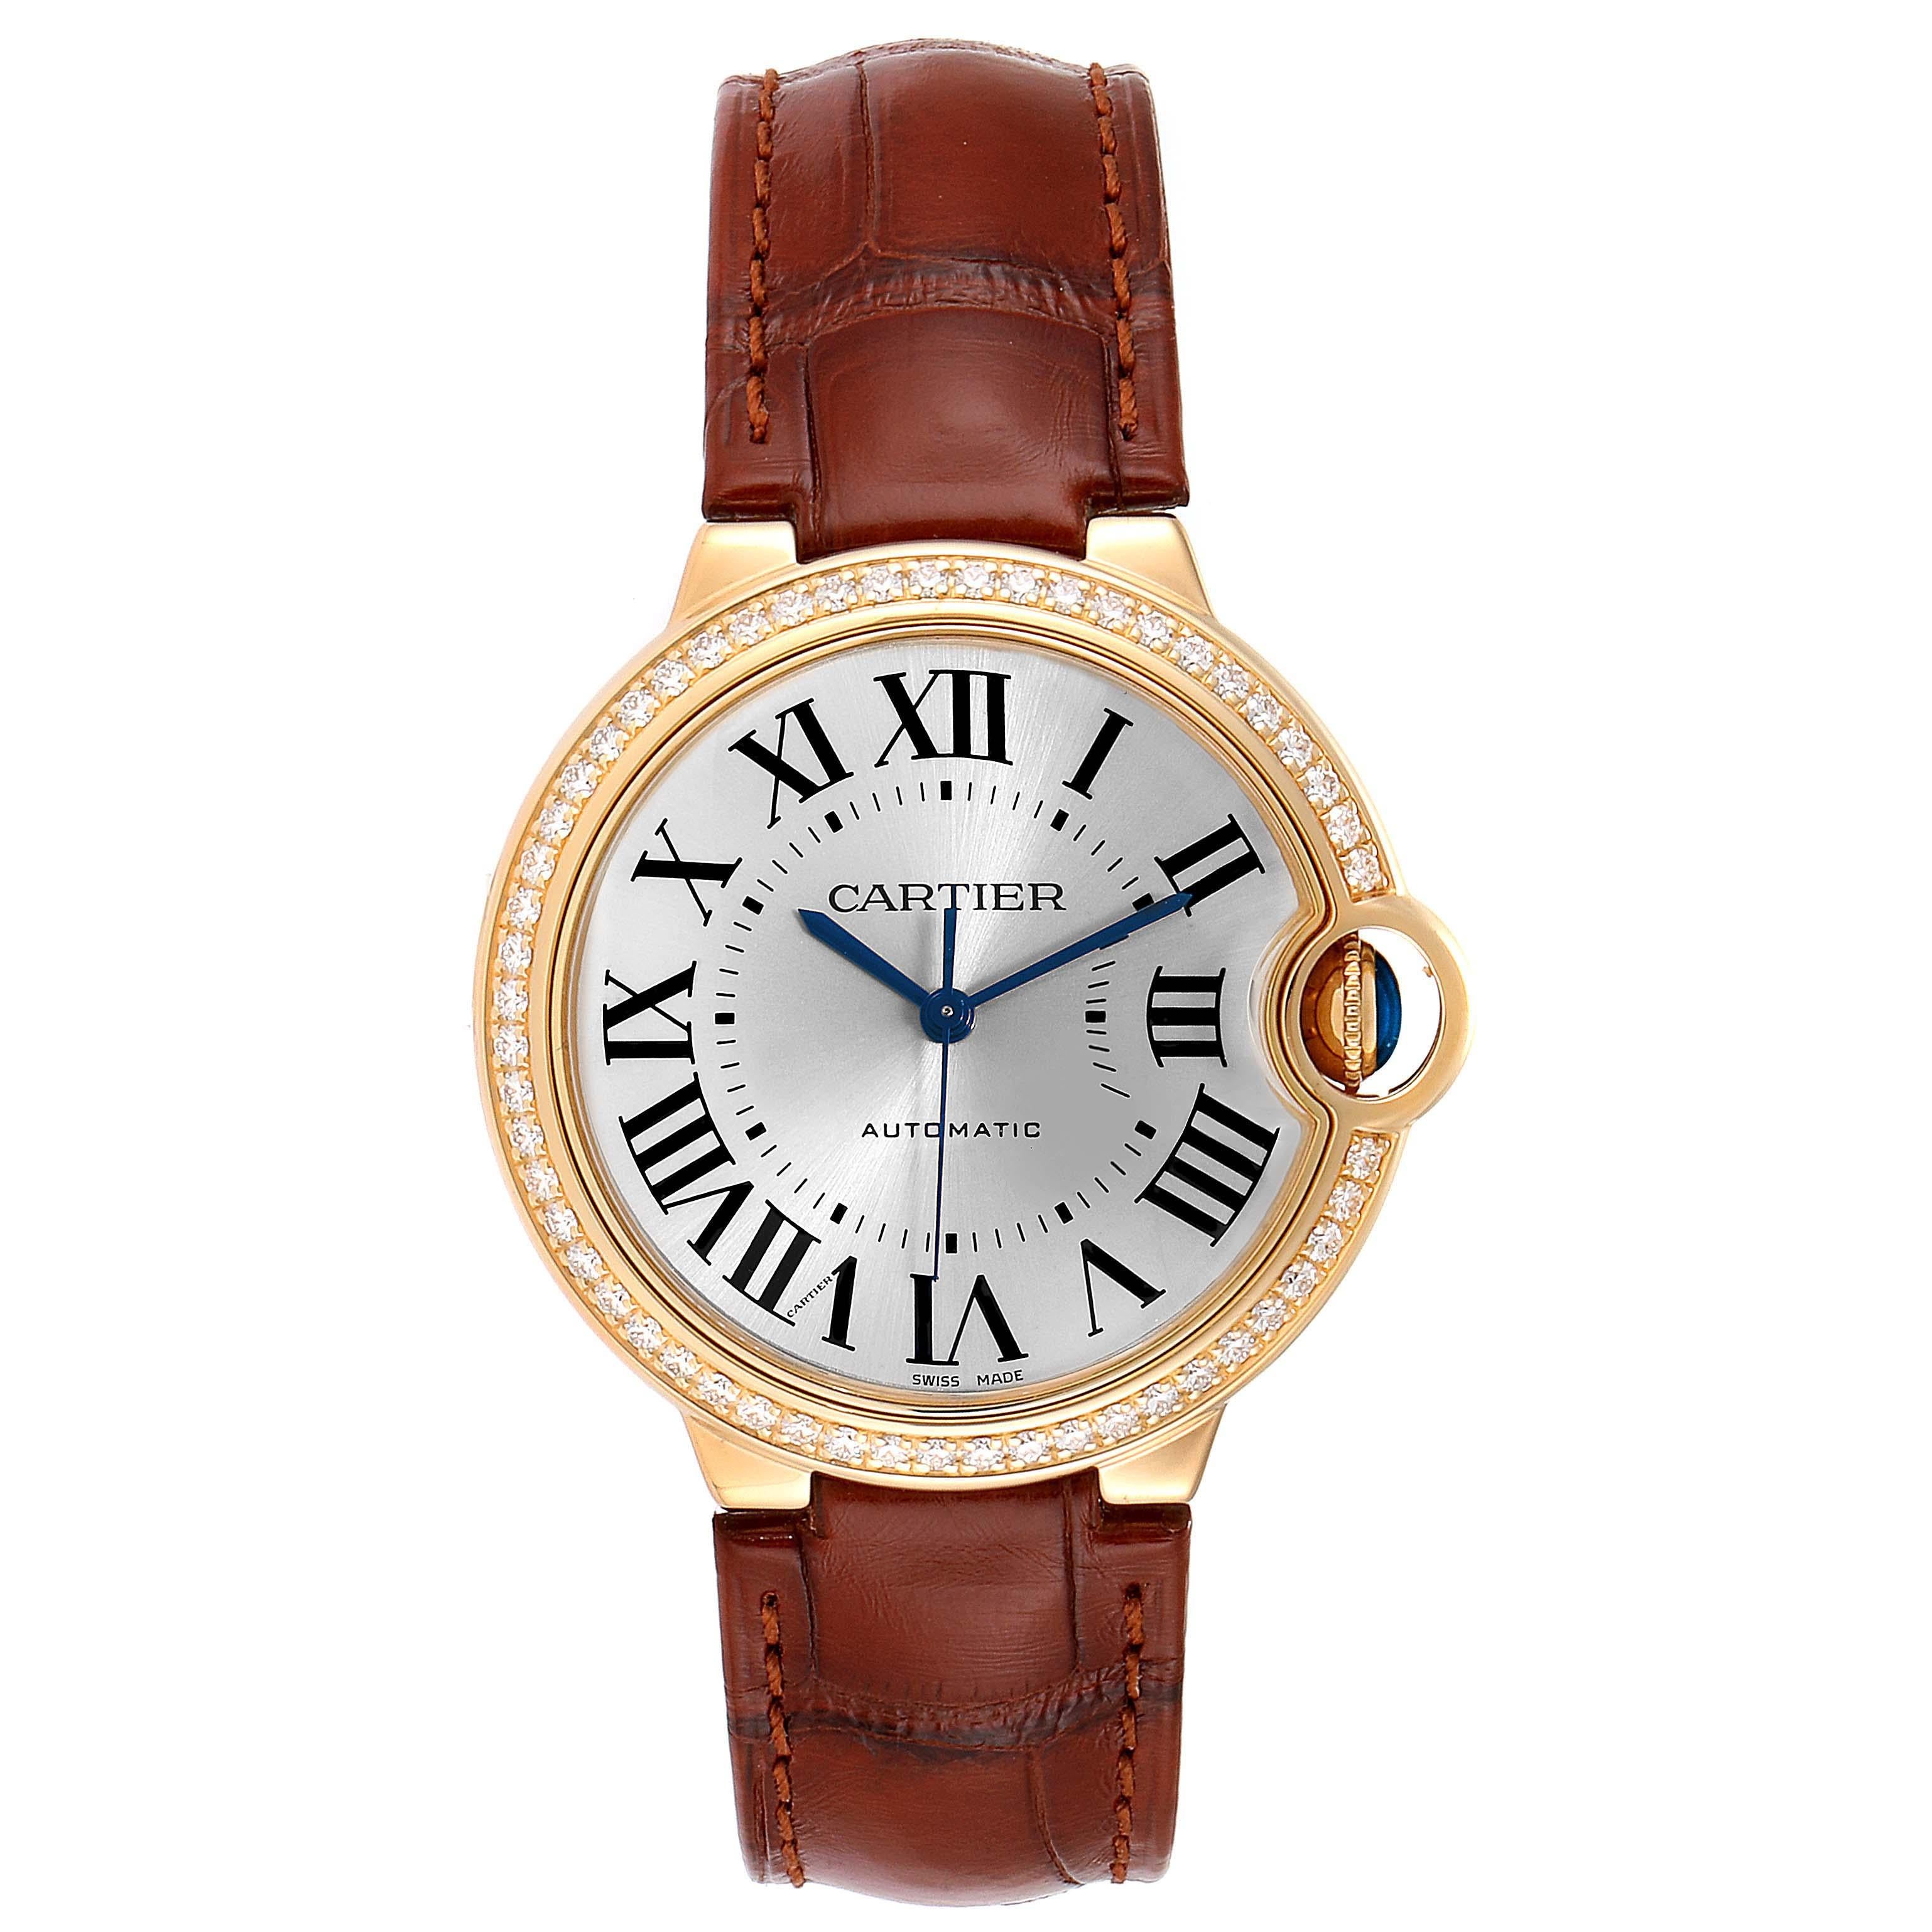 Cartier Ballon Bleu 36 Midsize Yellow Gold Diamond Watch WE900451 Unworn. Automatic self-winding movement. Round yellow gold case 36.0 mm in diameter. Fluted crown set with the blue sapphire cabochon. Original Cartier factory 54 brilliant-cut